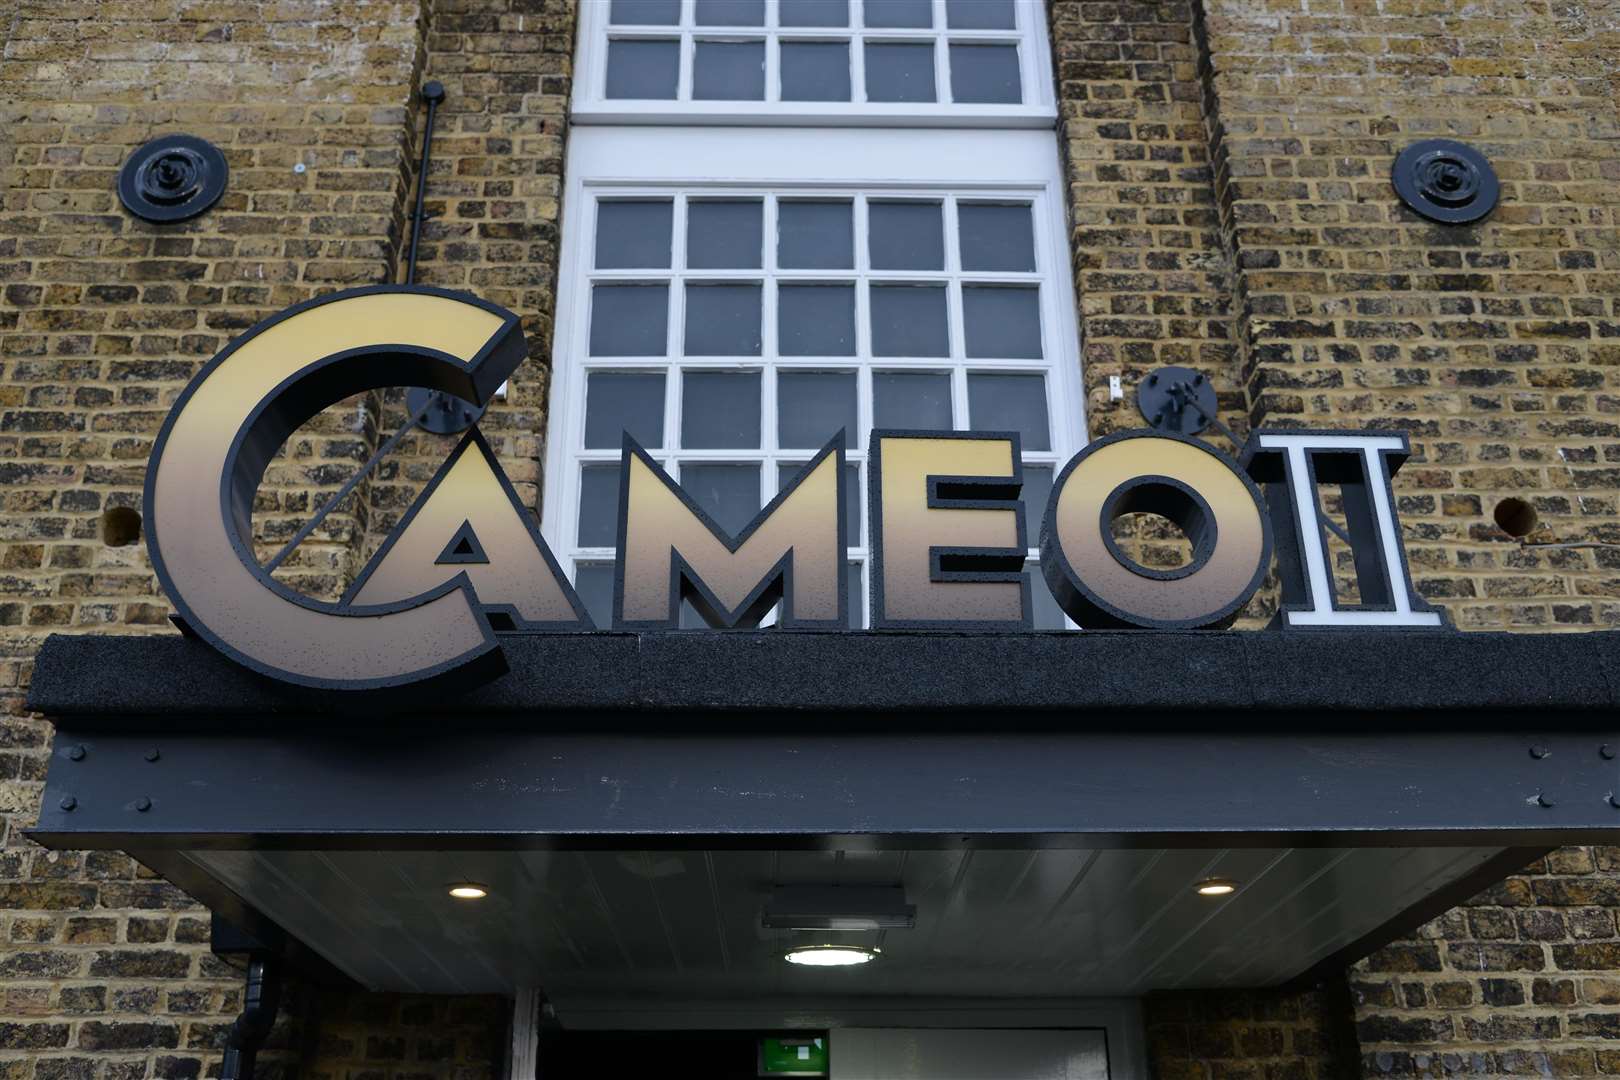 The bassist is set to take over Cameo with a DJ set on Friday